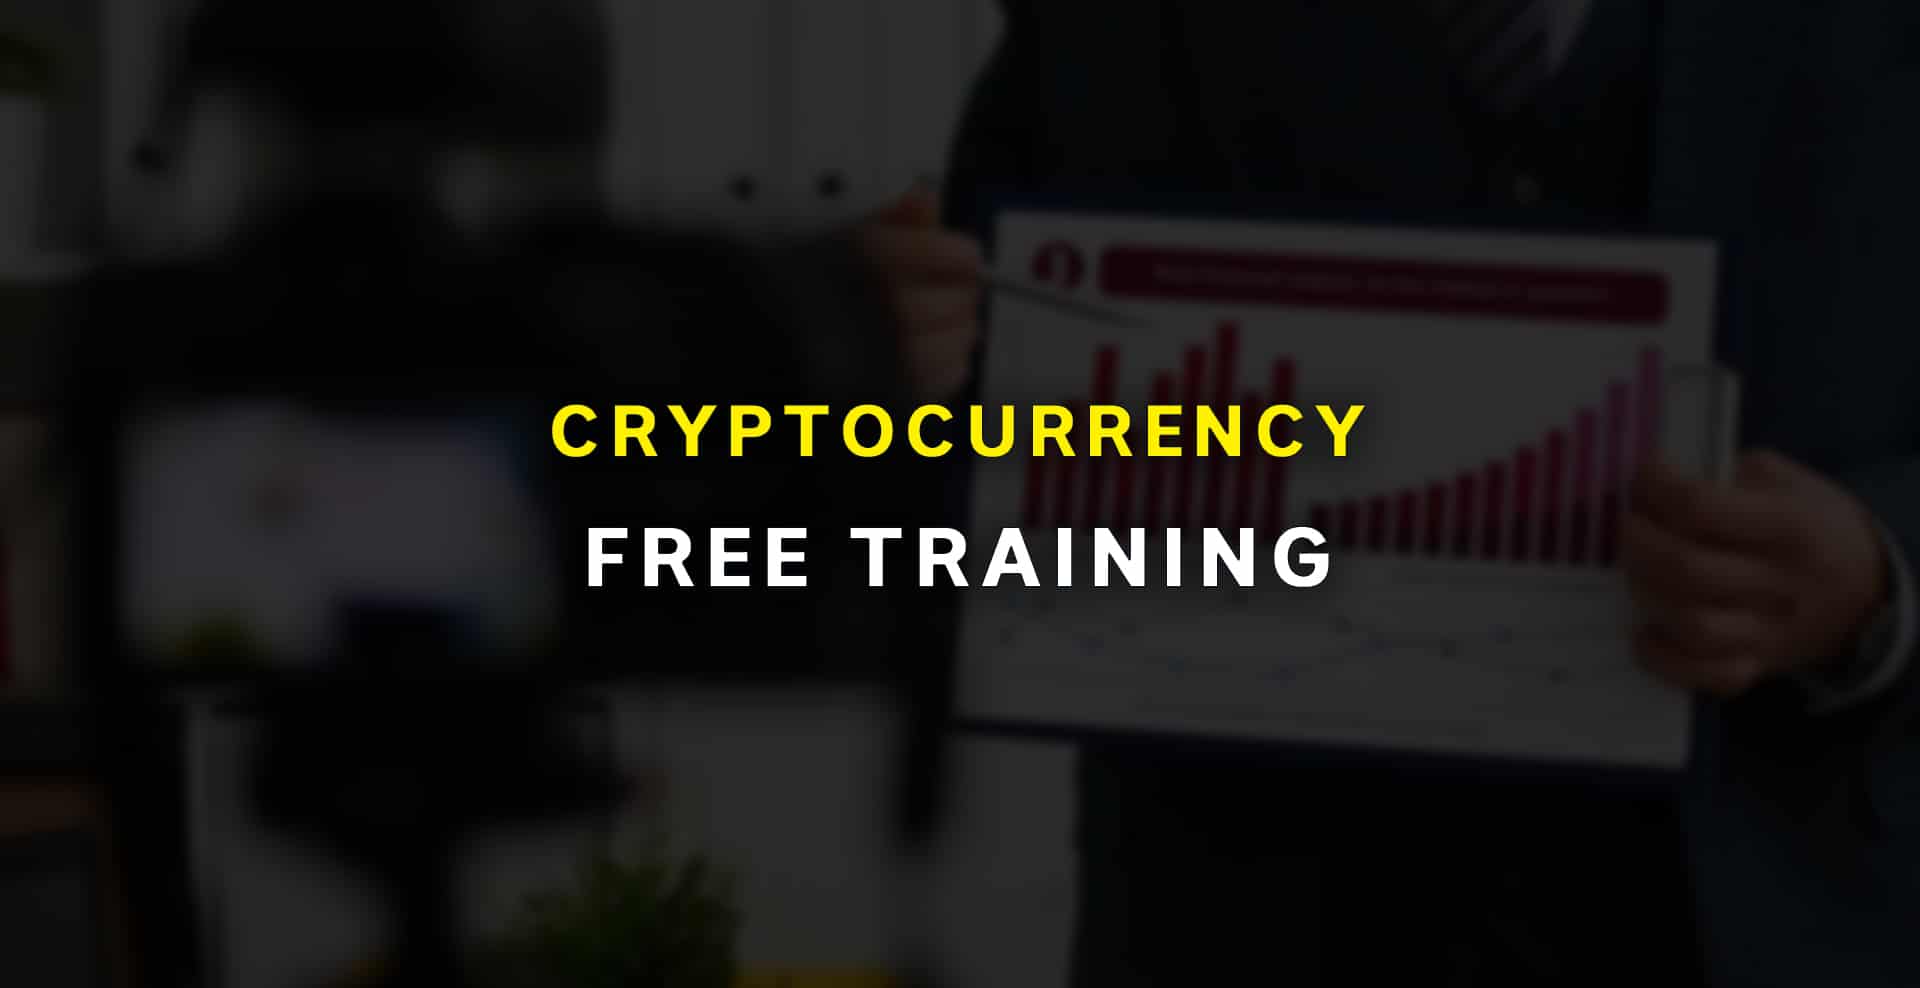 Cryptocurrency training